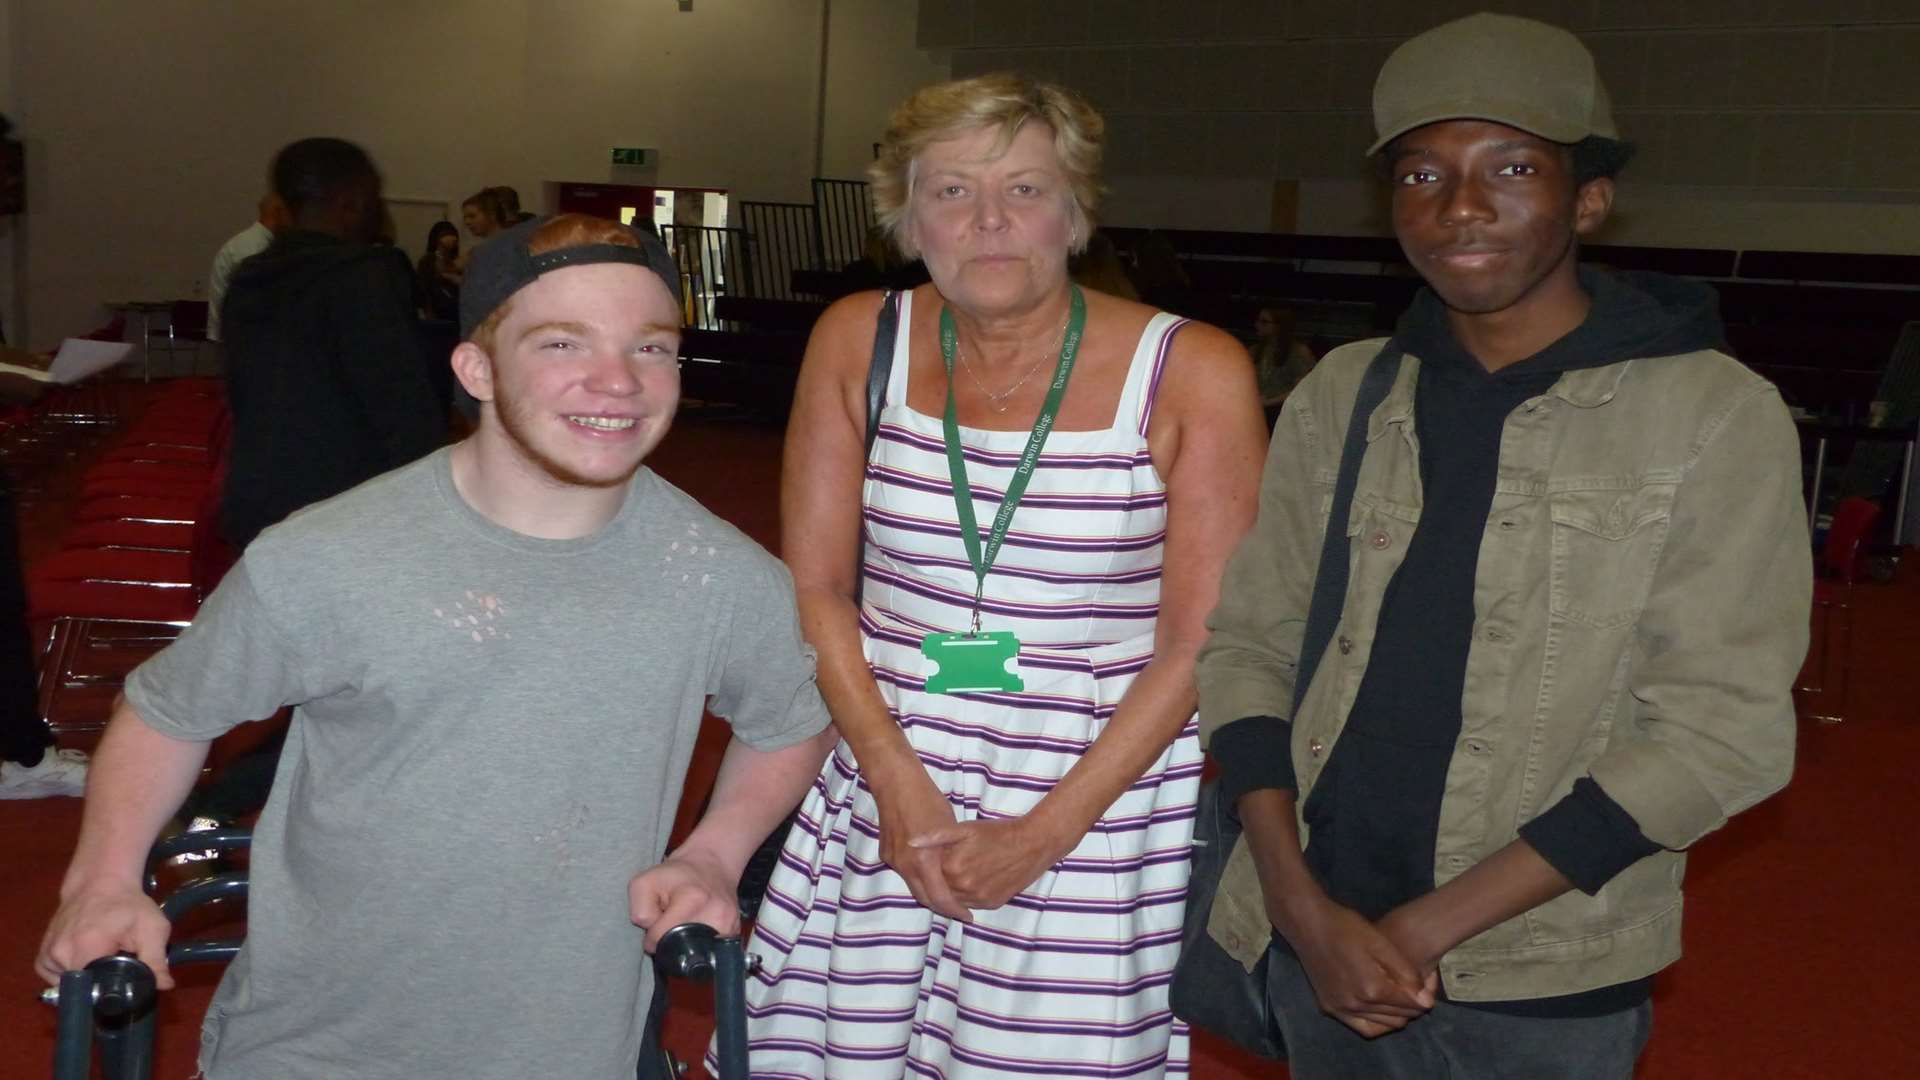 Charlie Randall, who gained a marketing apprenticeship with lifestyle photography, and Oluwaseyitan Osho who secured an apprenticeship with the BBC, celebrating with careers adviser Lesley Tannock